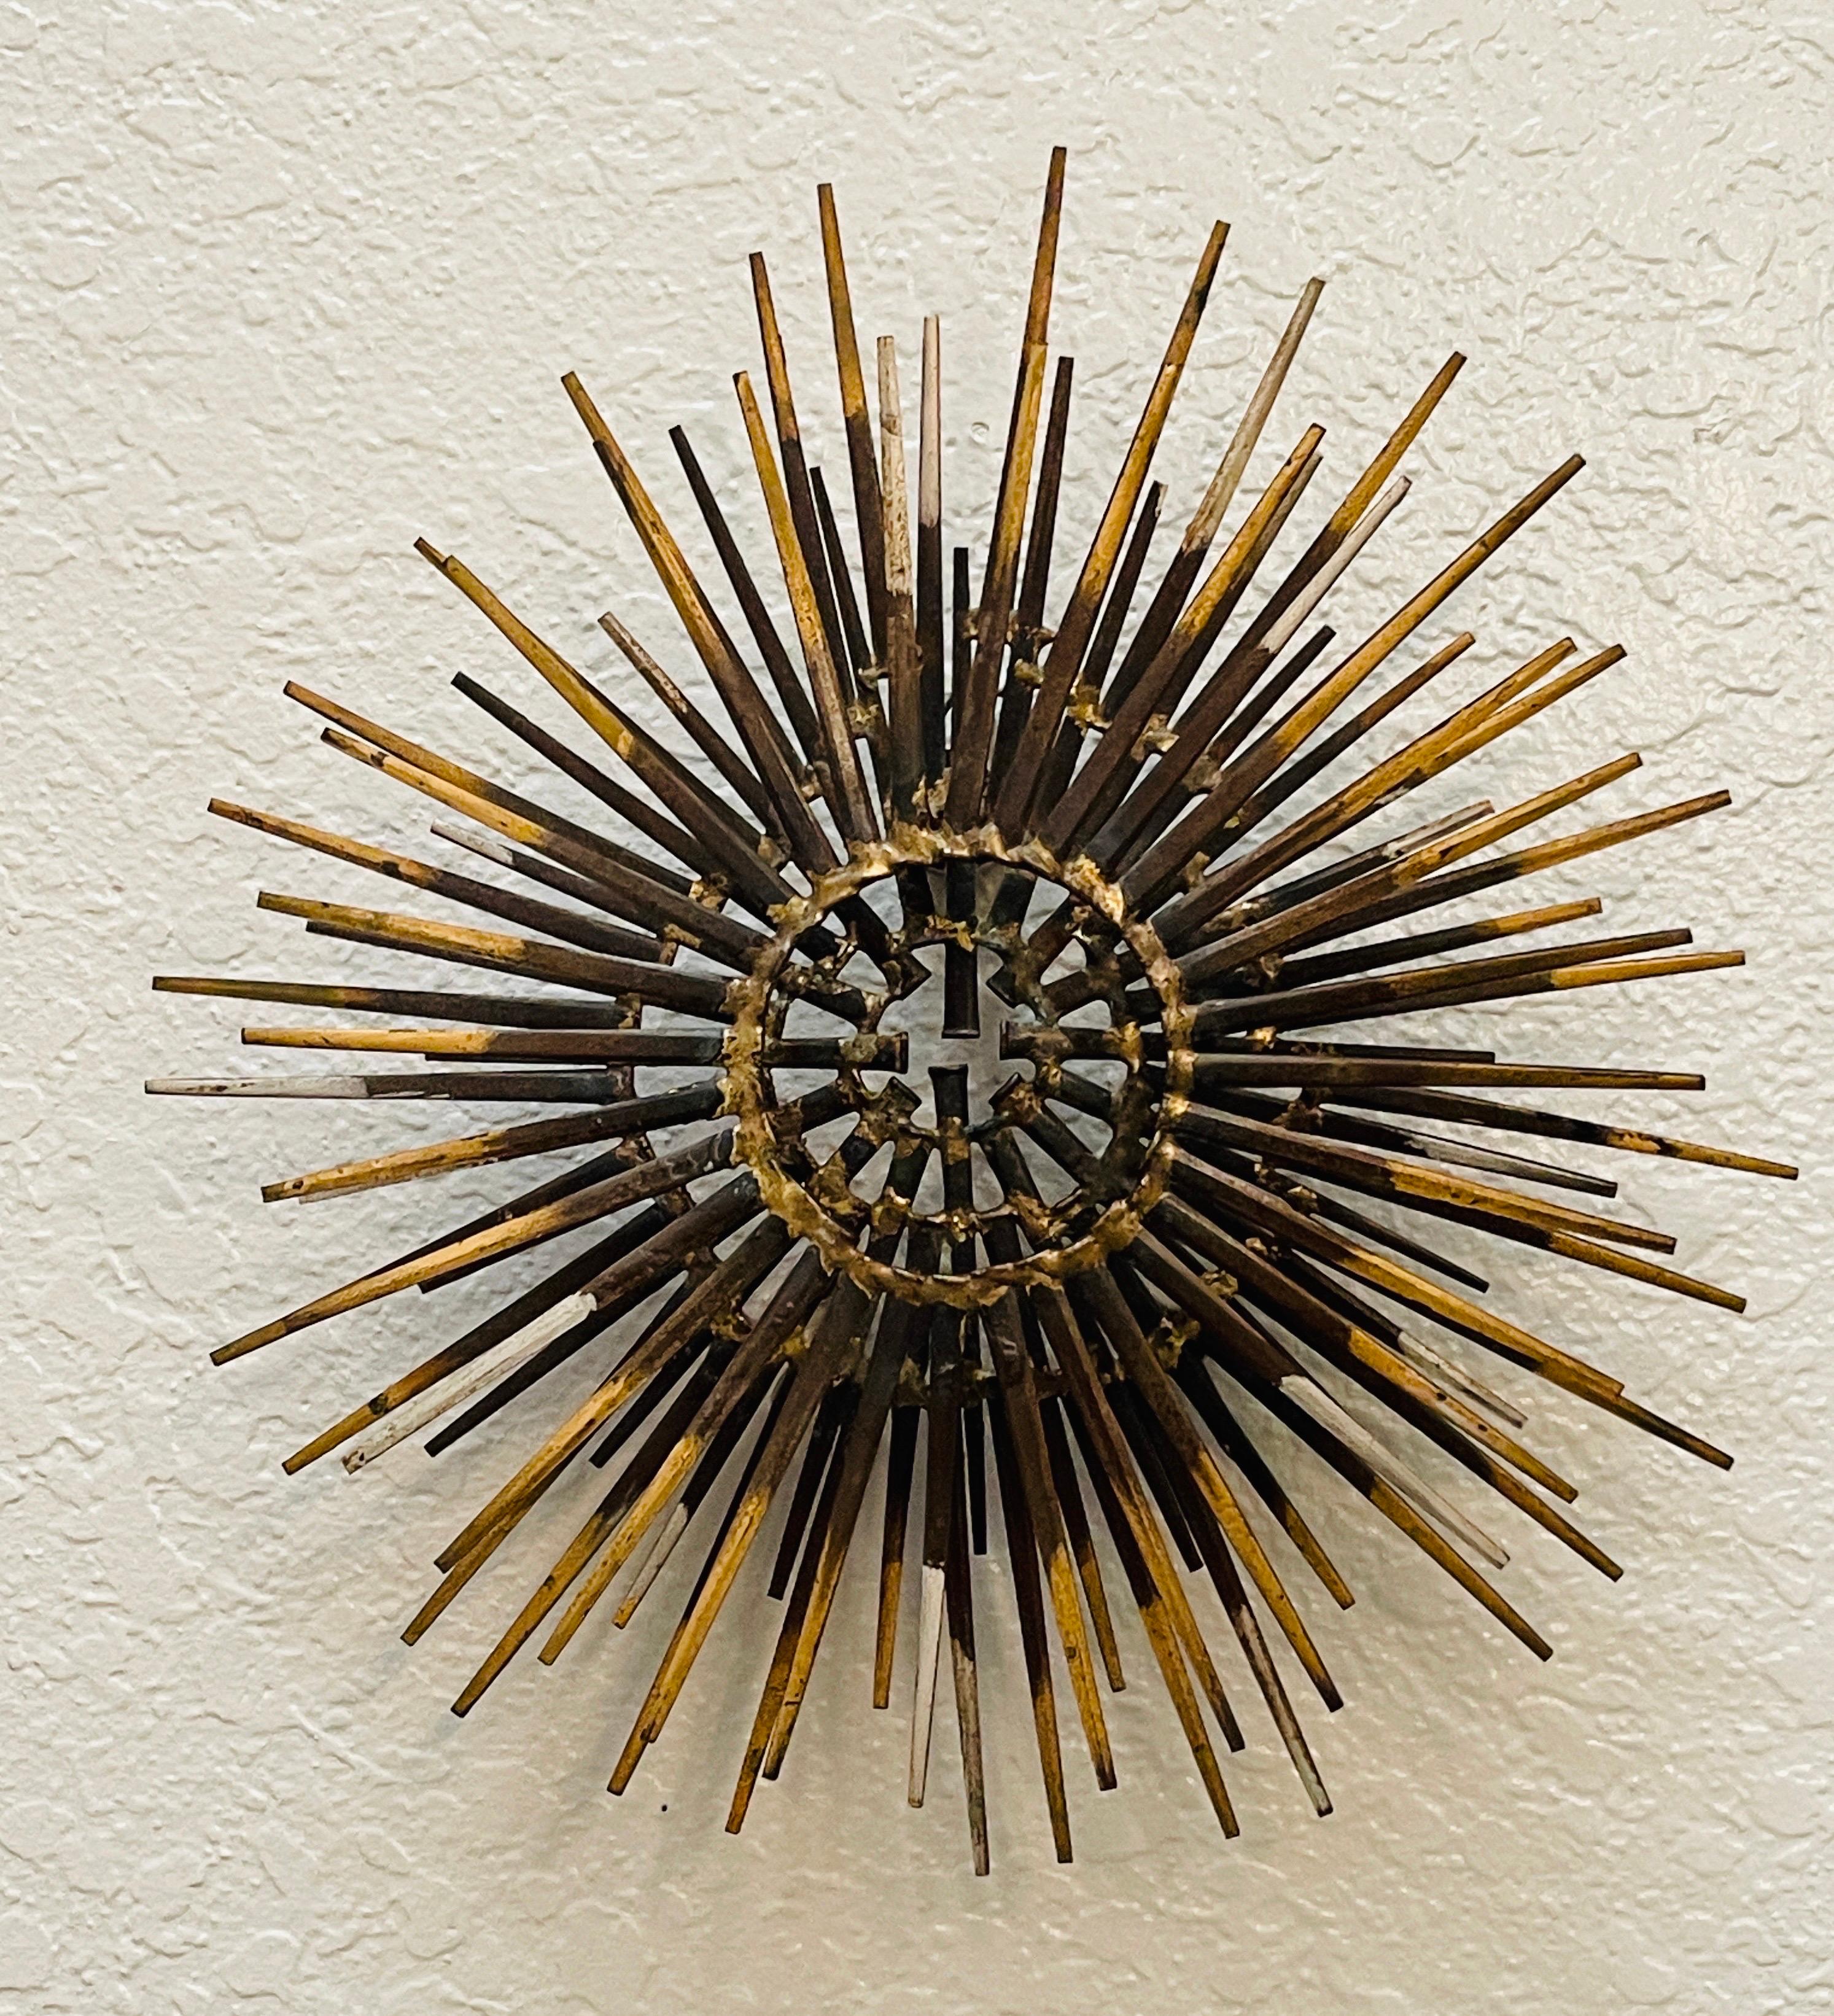 Diminutive Gilt Iron Two-Tier Sunburst Wall Sculpture by William Bowie
USA, Circa 1970s, Unmarked.

A fine example of William Bowie's precisionly made two tier starburst wall sculpture. Ready to hang or place

Overall measurements
top tier has 11